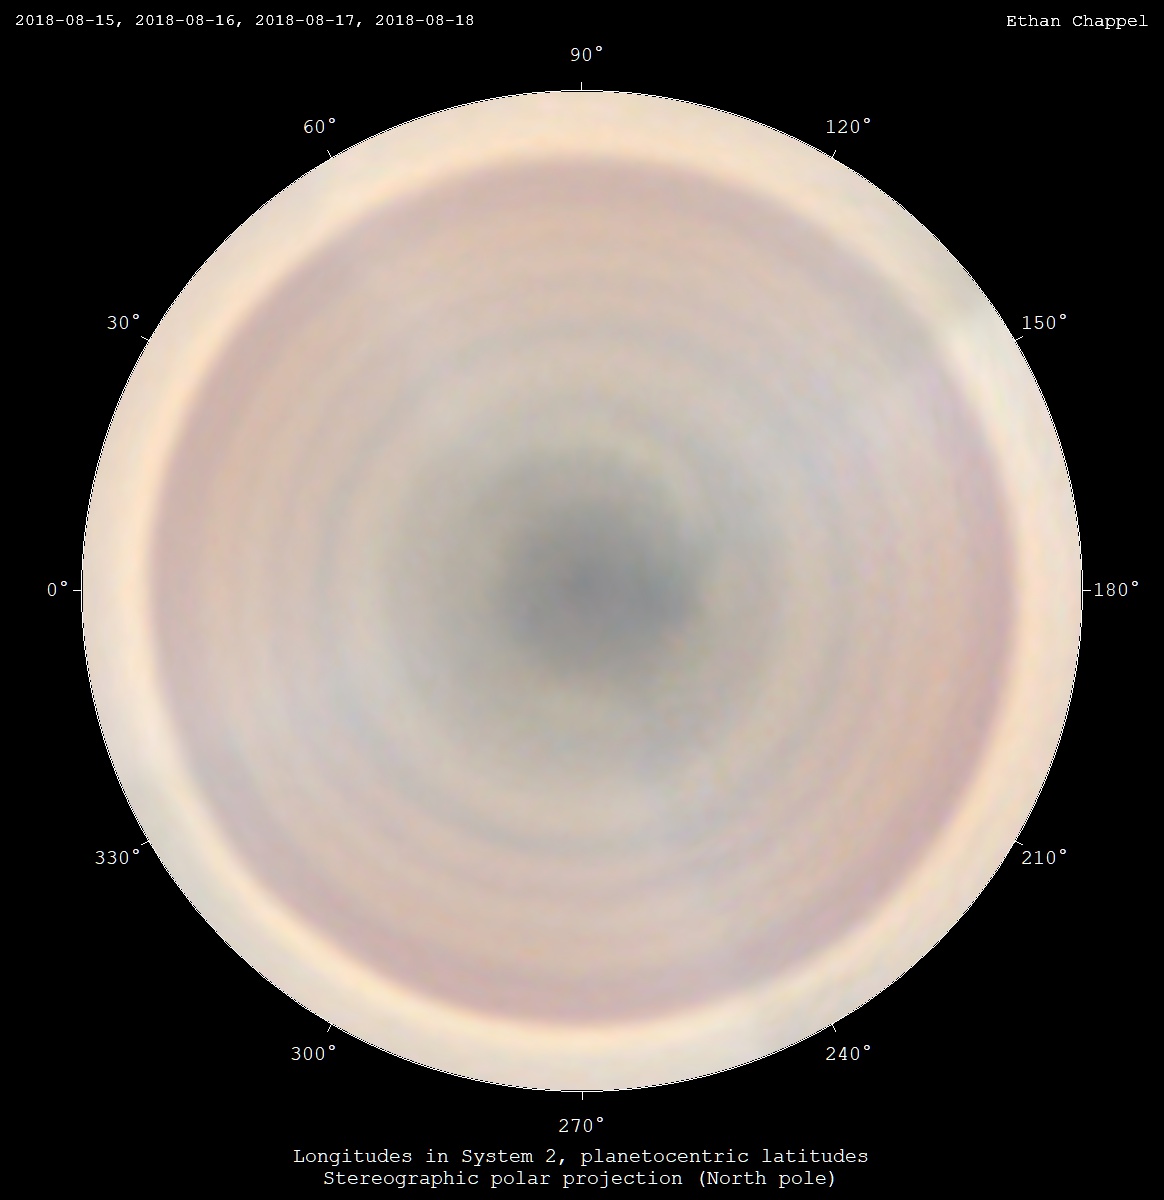 Consistently favorable nights in mid-August allowed me to create a full map of Saturn's northern hemisphere.